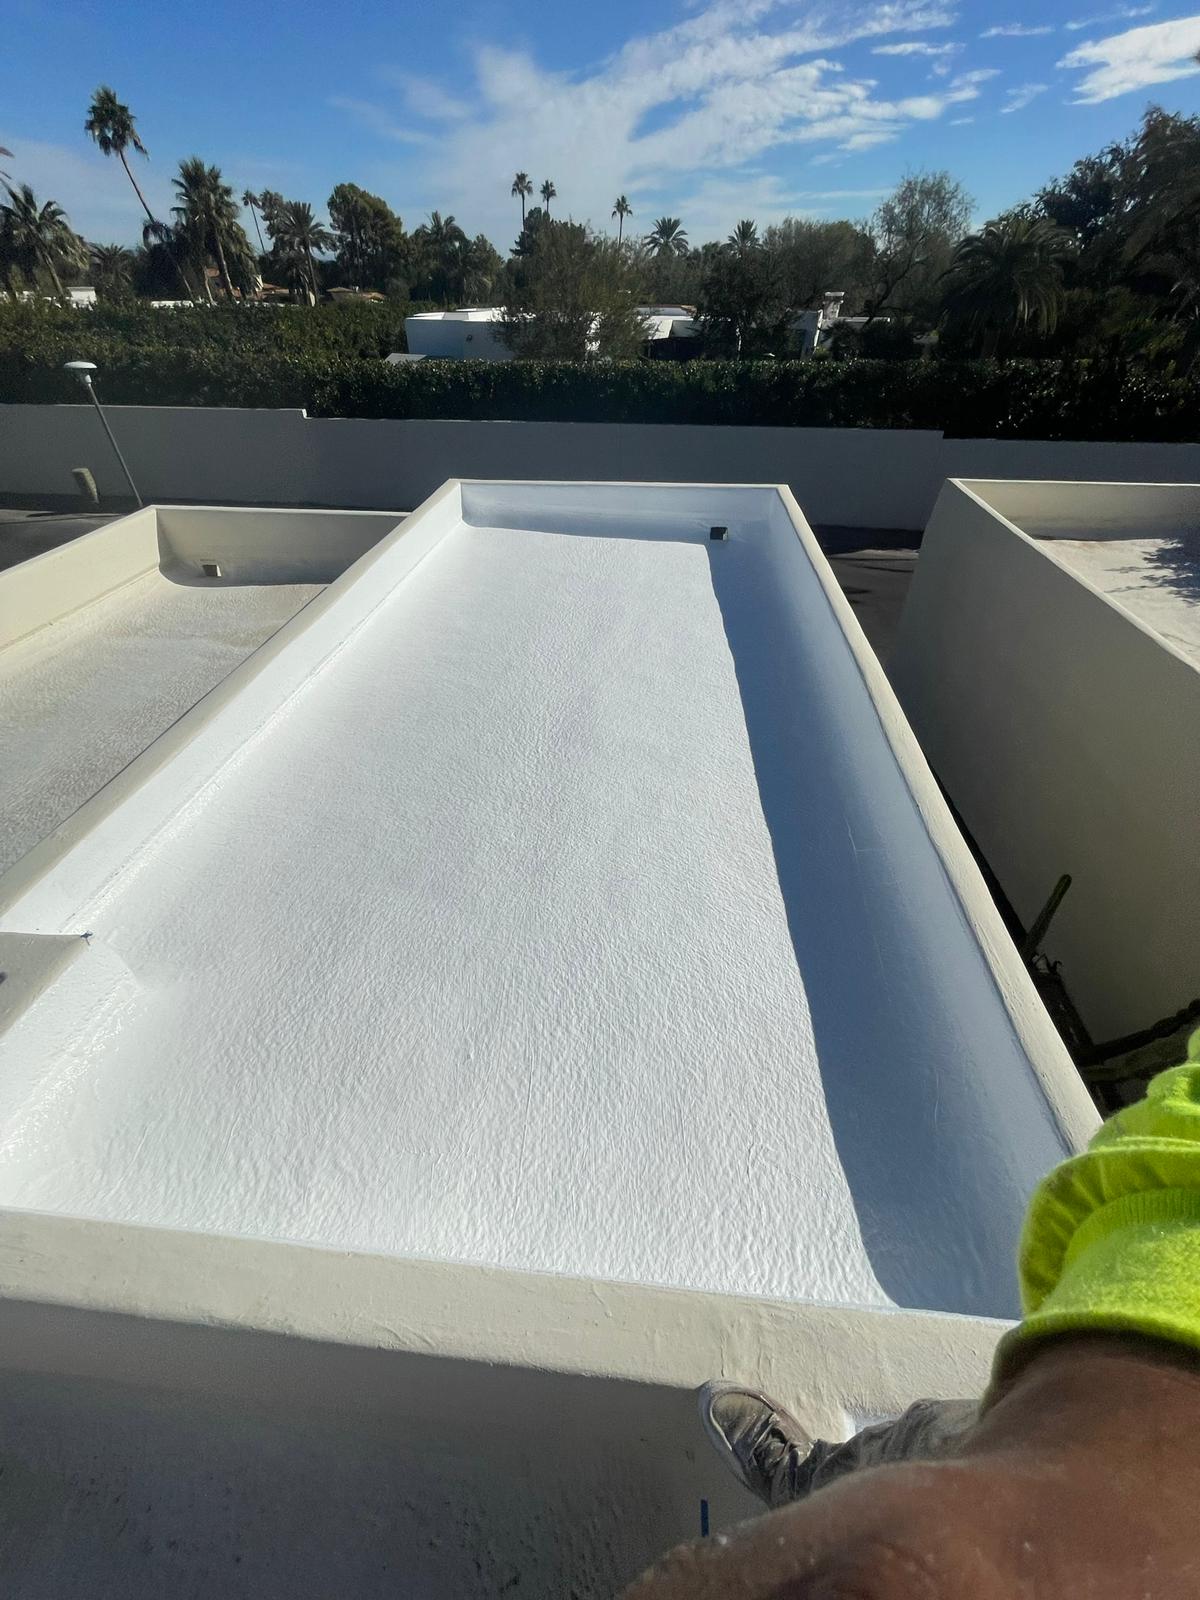 Newly completed spray foam roofing on a residential property in Estancia.